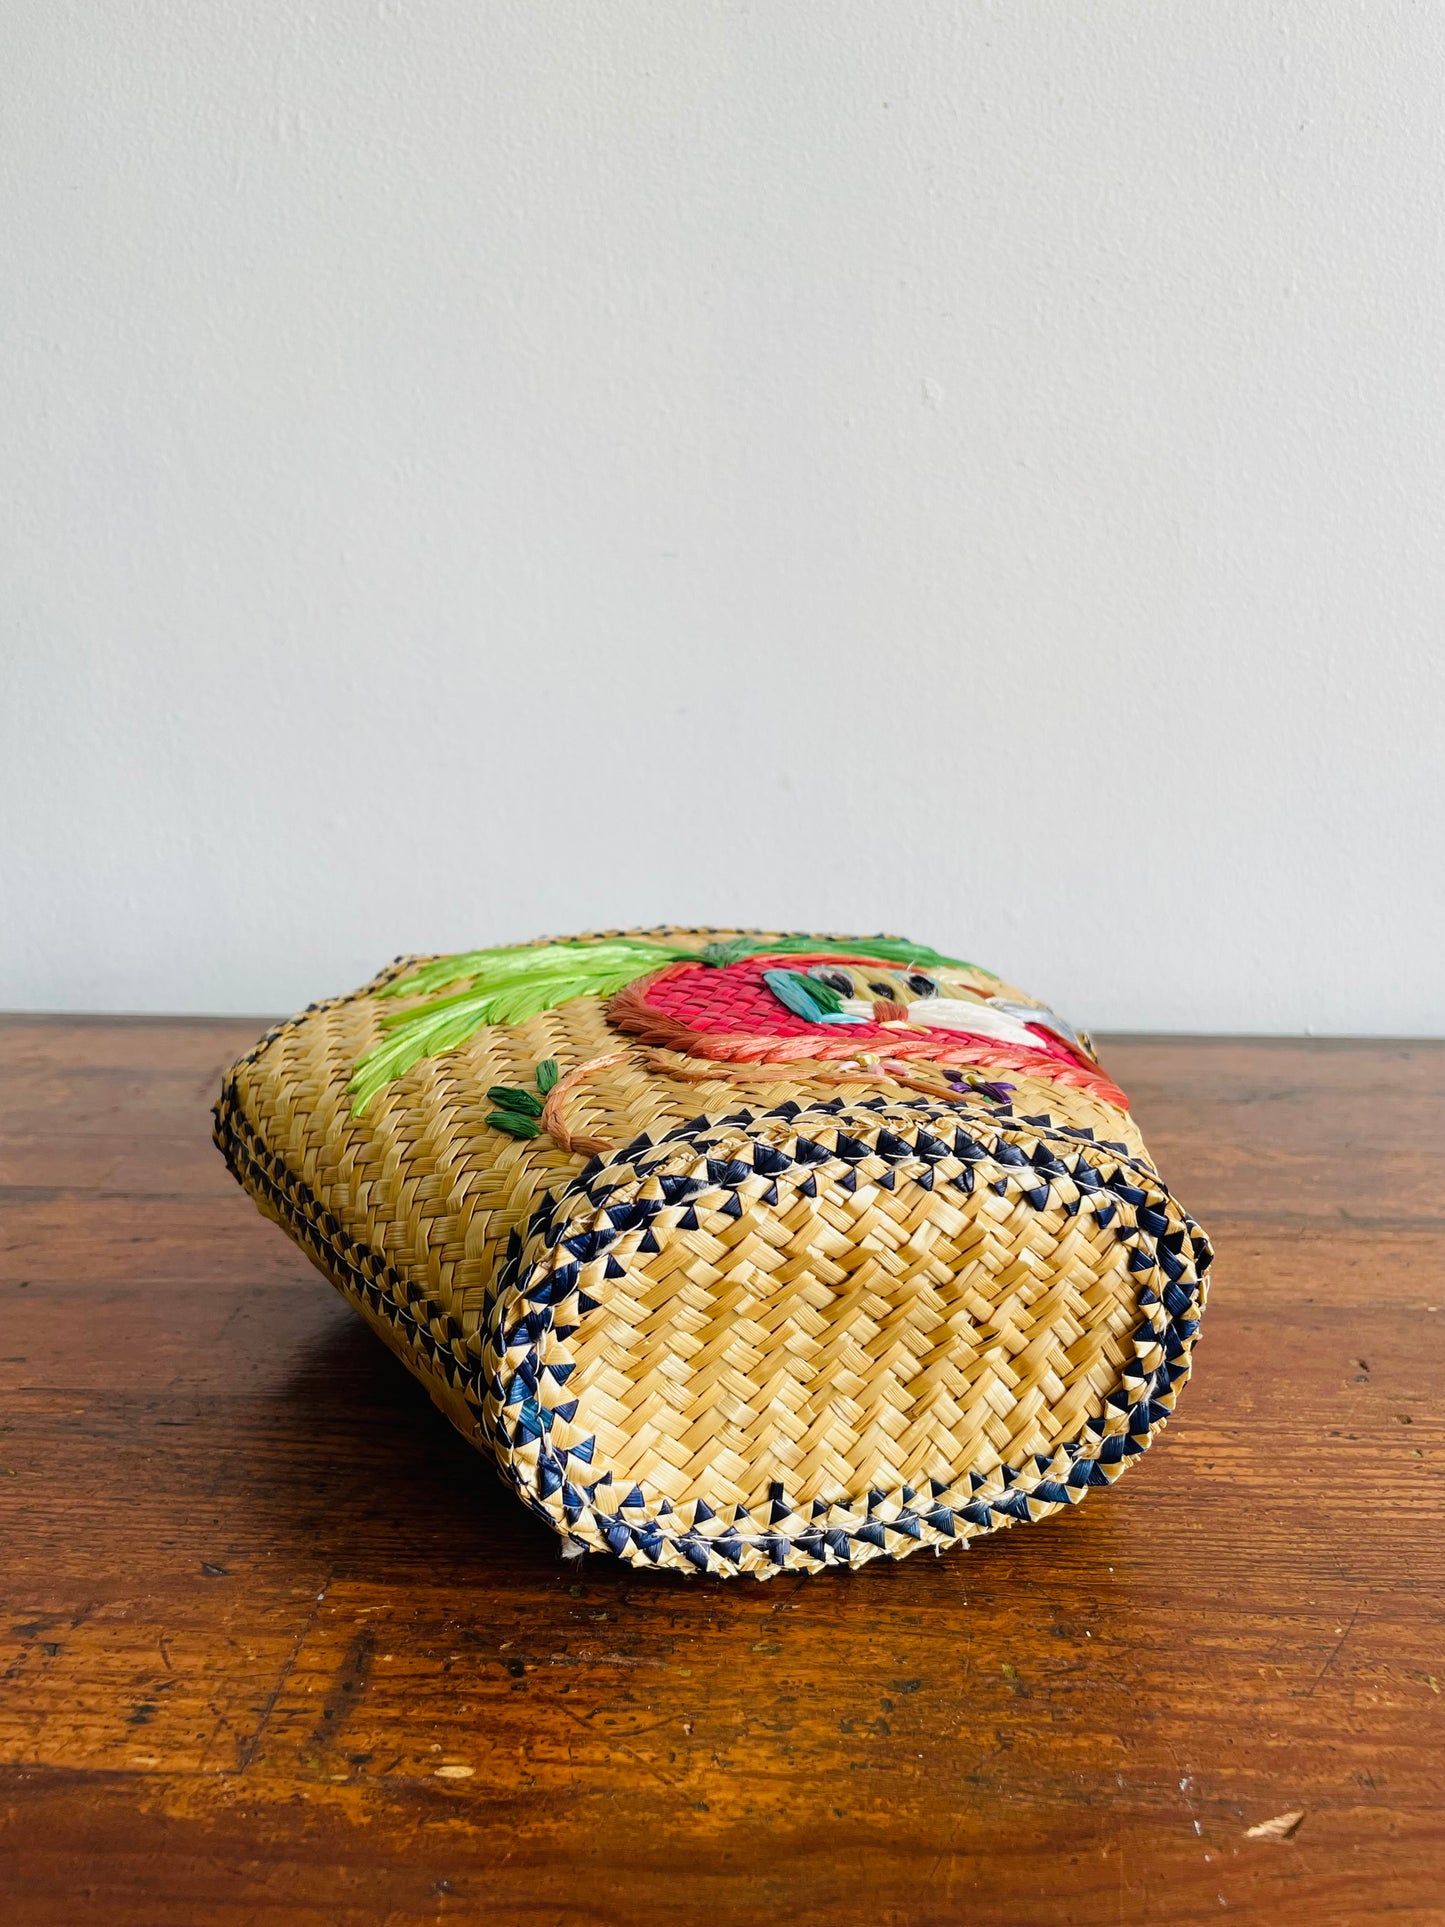 Mini Lined Woven Straw Purse with Cute Raffia Design - Made in the People's Republic of China